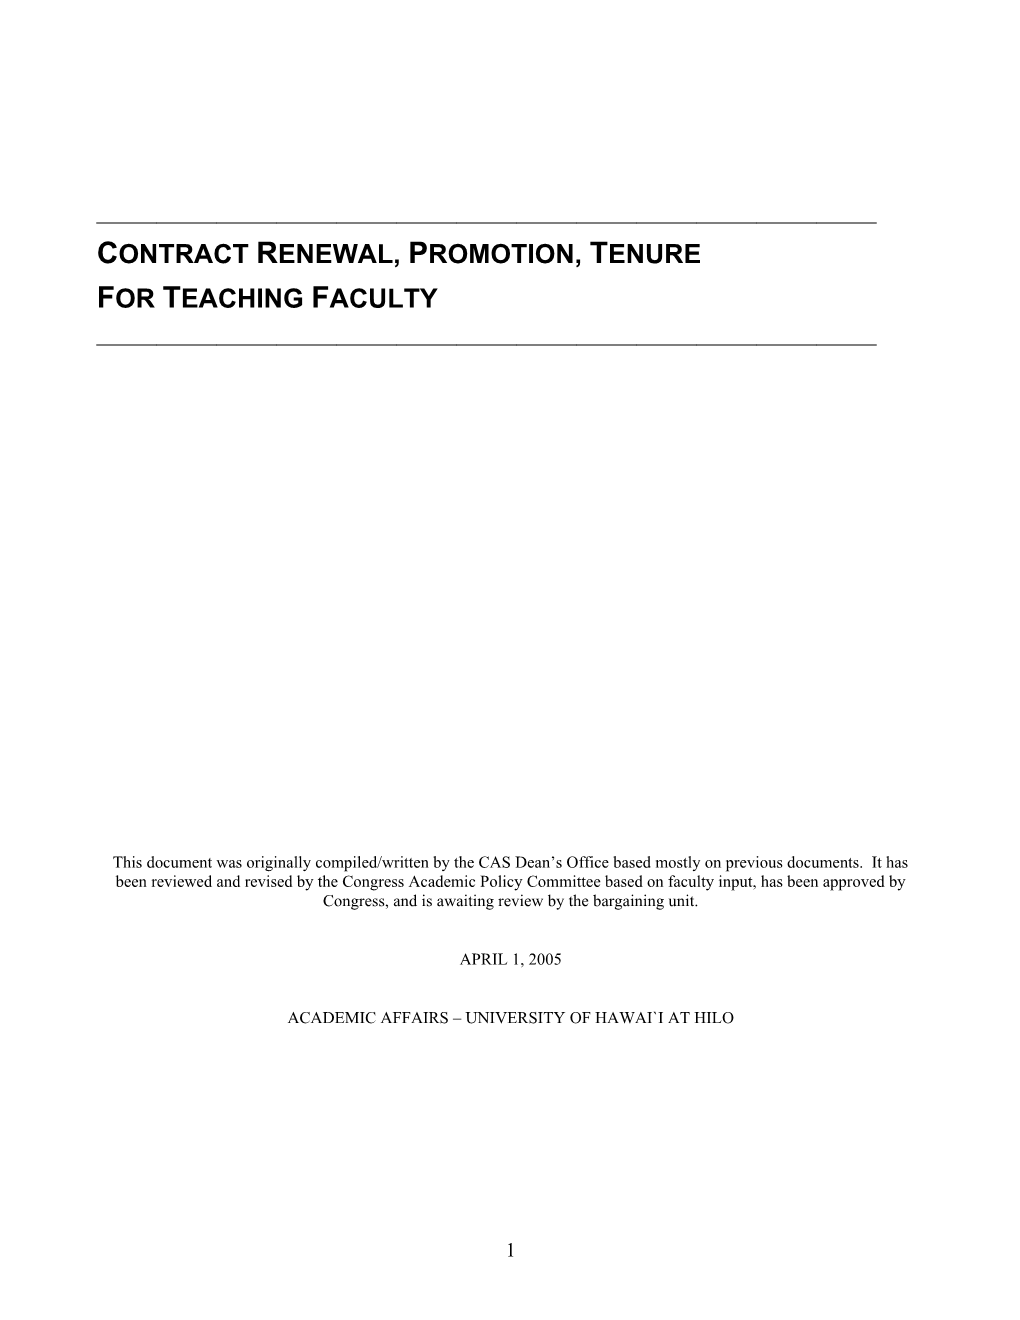 Contract Renewal, Promotion, Tenure